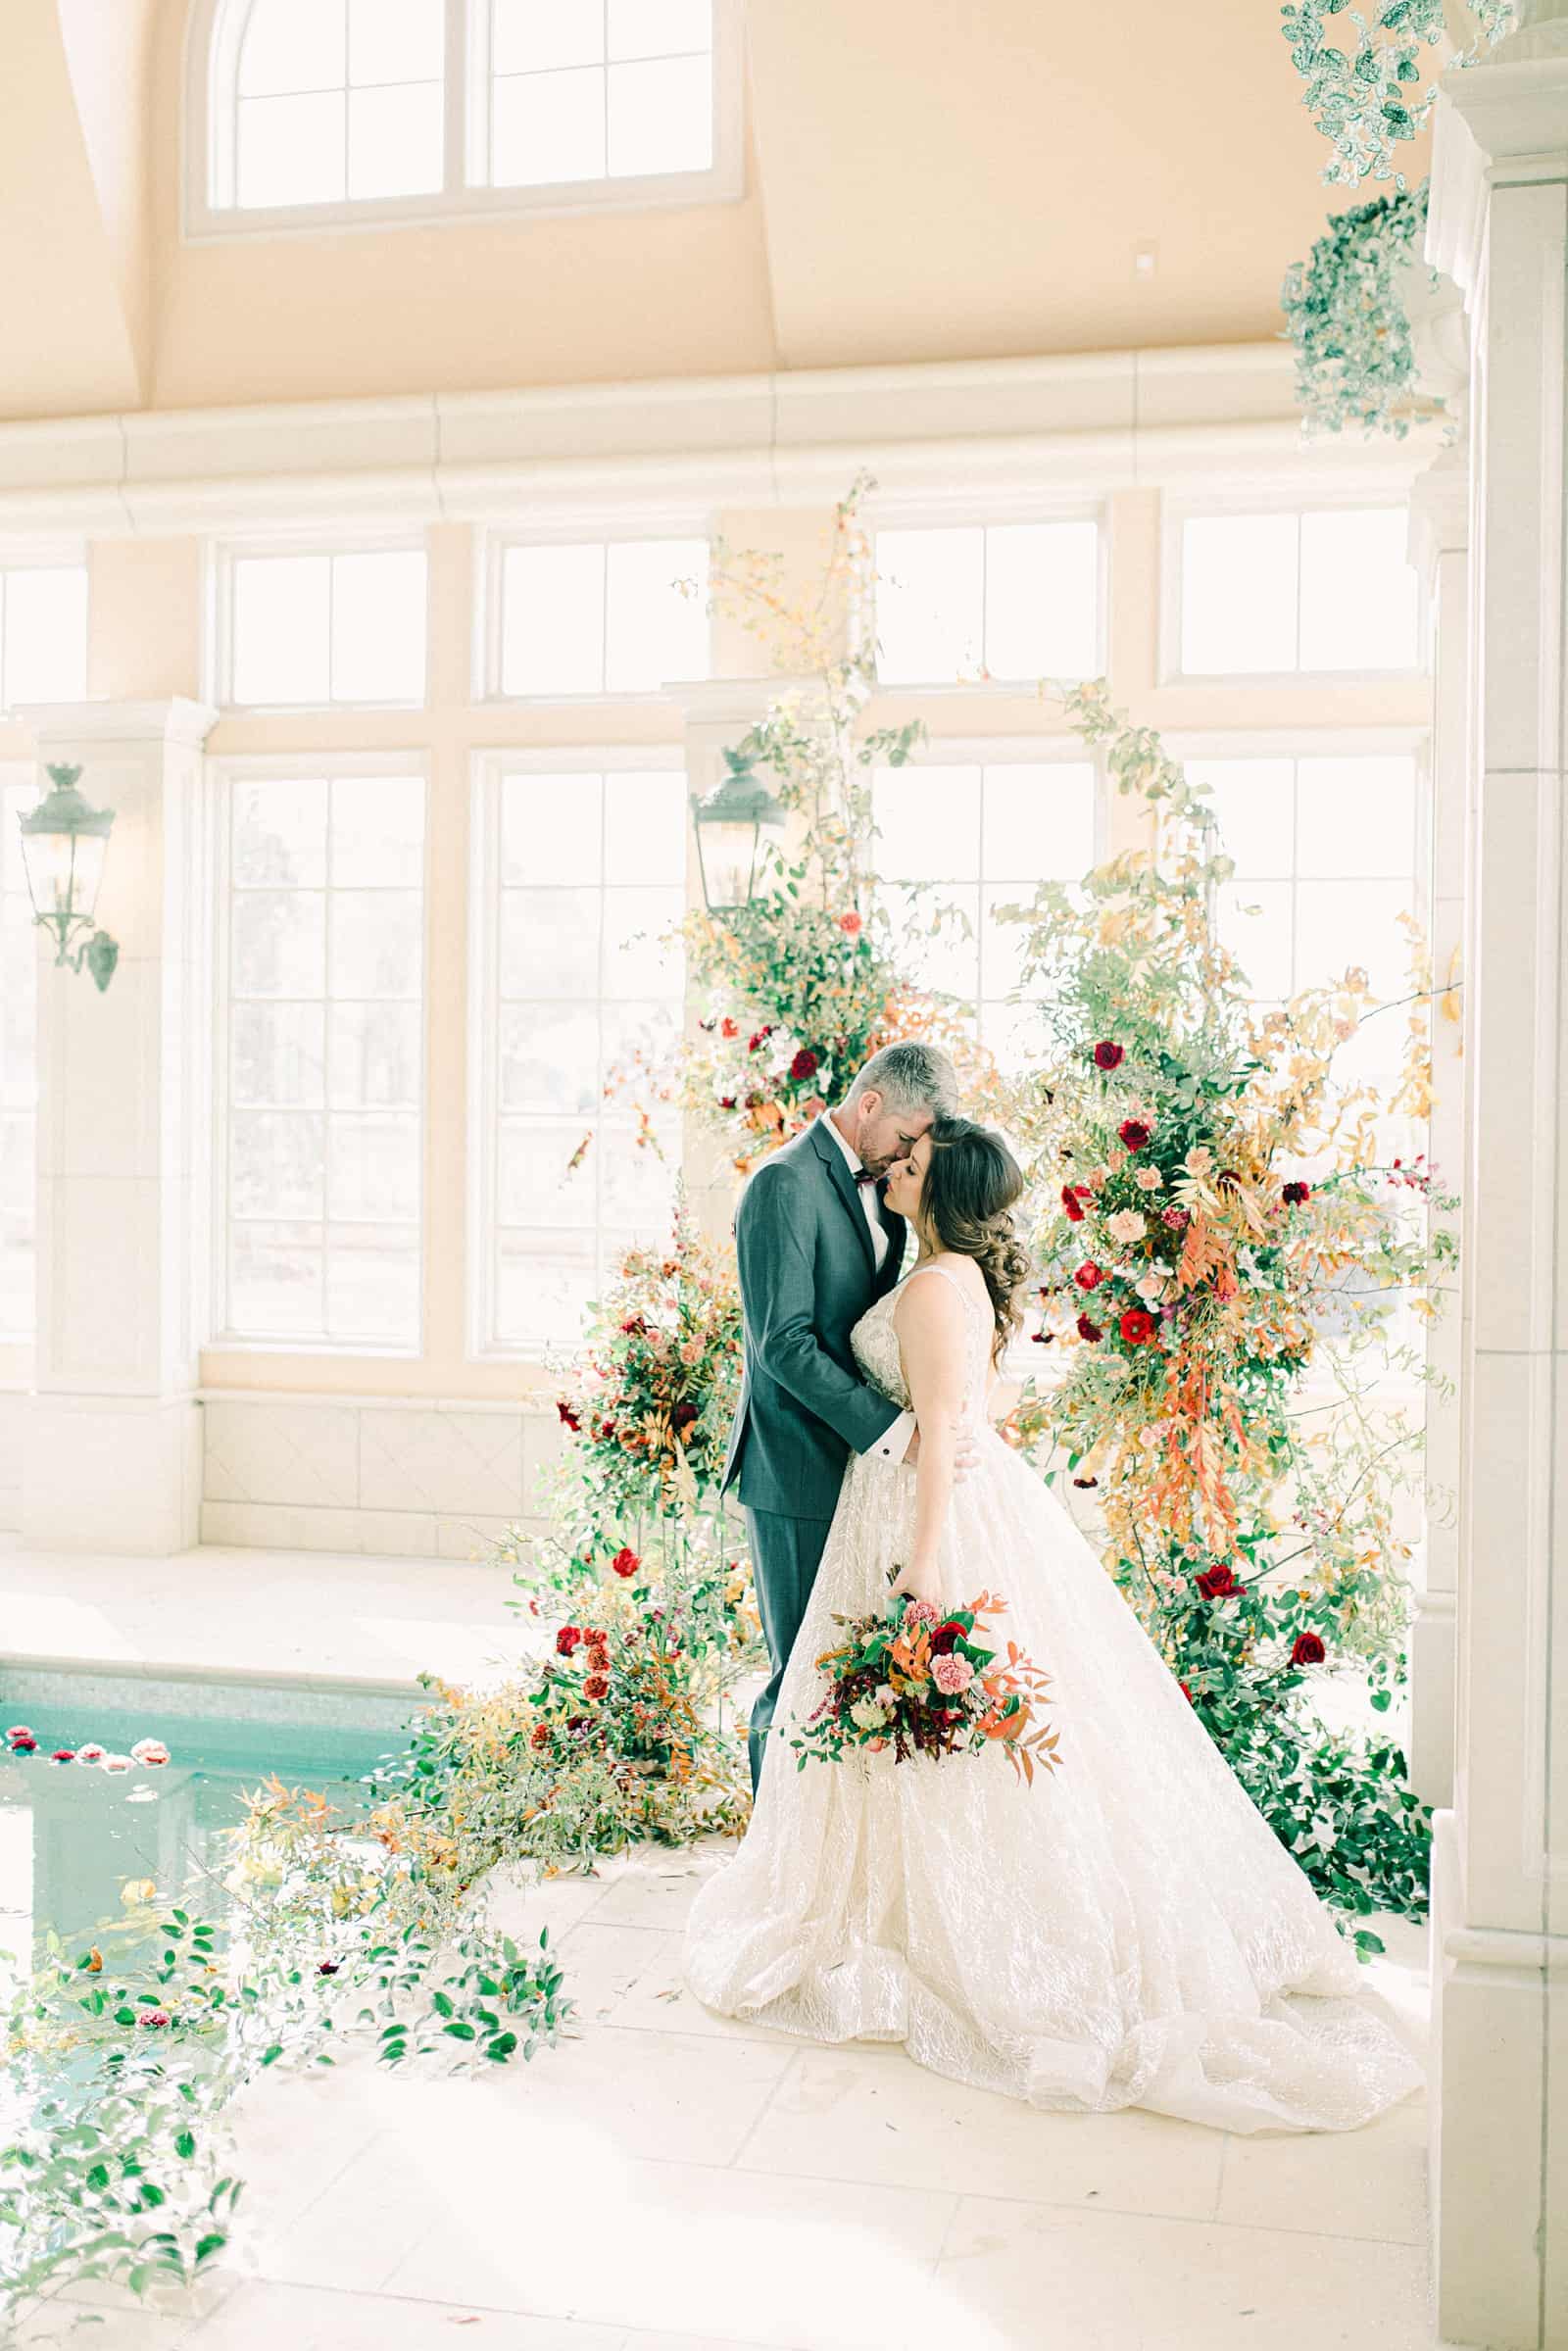 French-inspired wedding at the Olana mansion in Dallas, Texas, pool house ceremony, bride and groom with ceremony backdrop